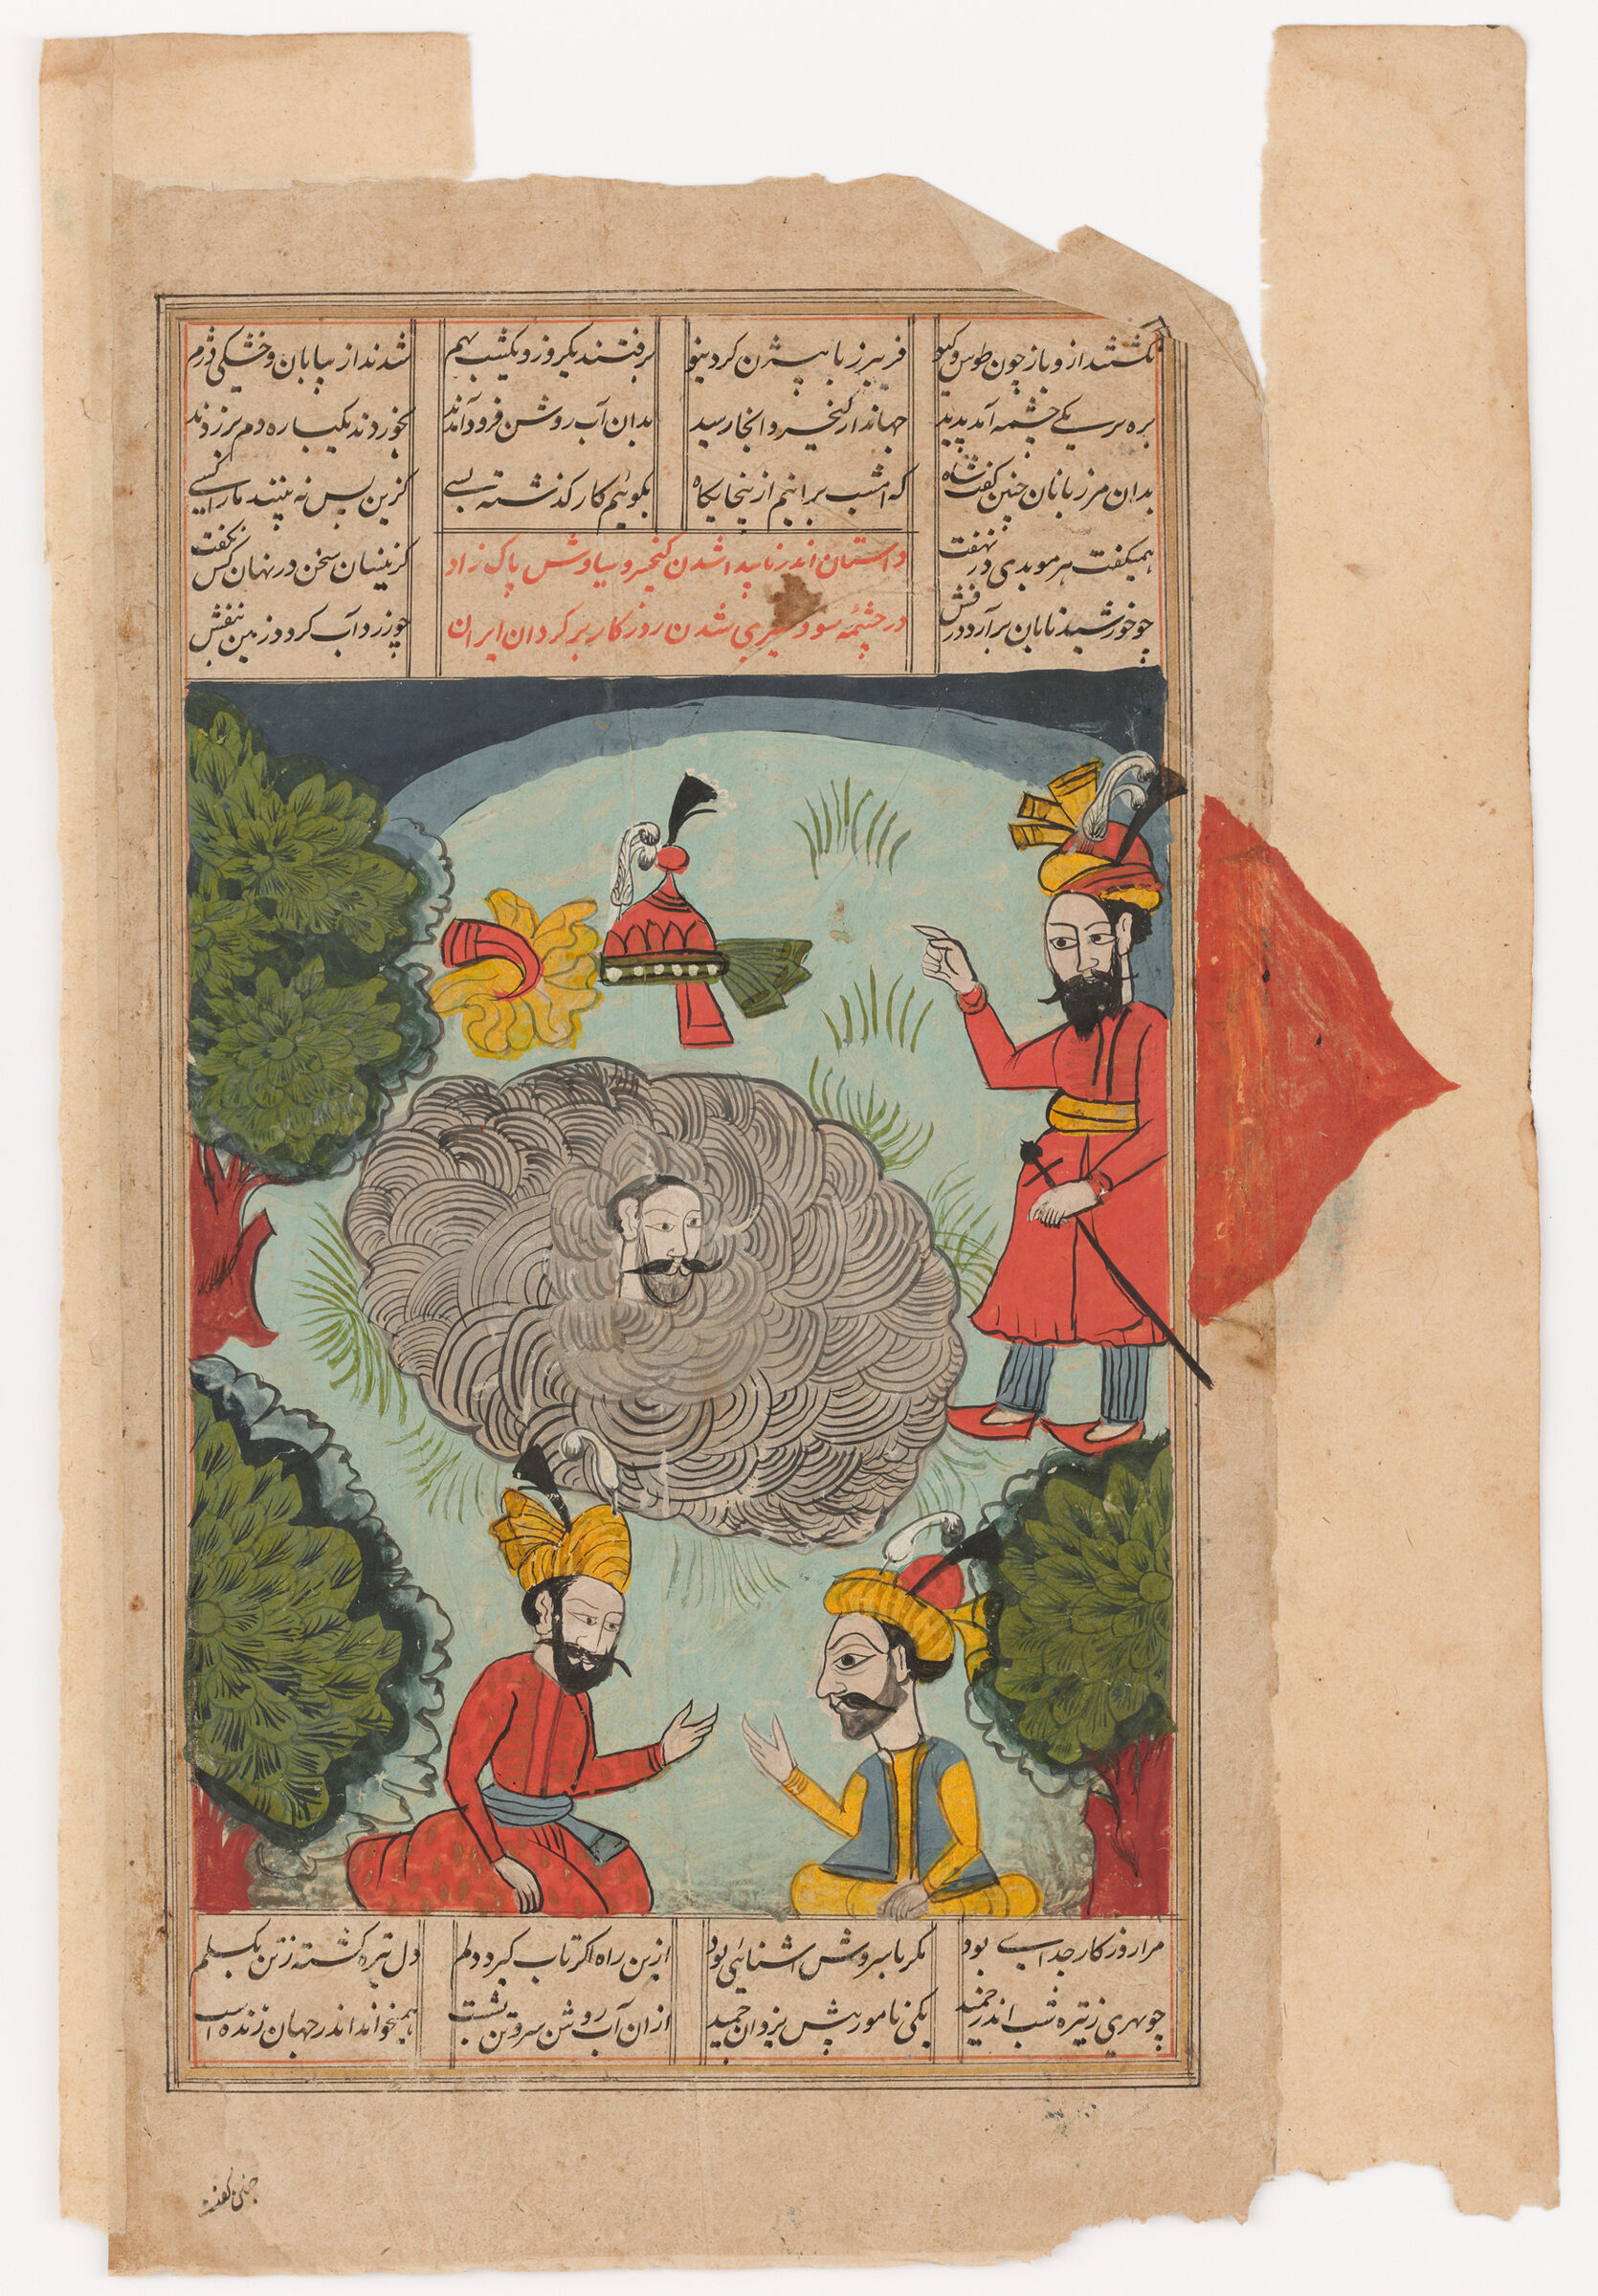 Disappearance Of  Kay Khusraw (Text Recto; Painting Verso Of Folio 323), Illustrated Folio From A Manuscript Of The Shahnama By Firdawsi